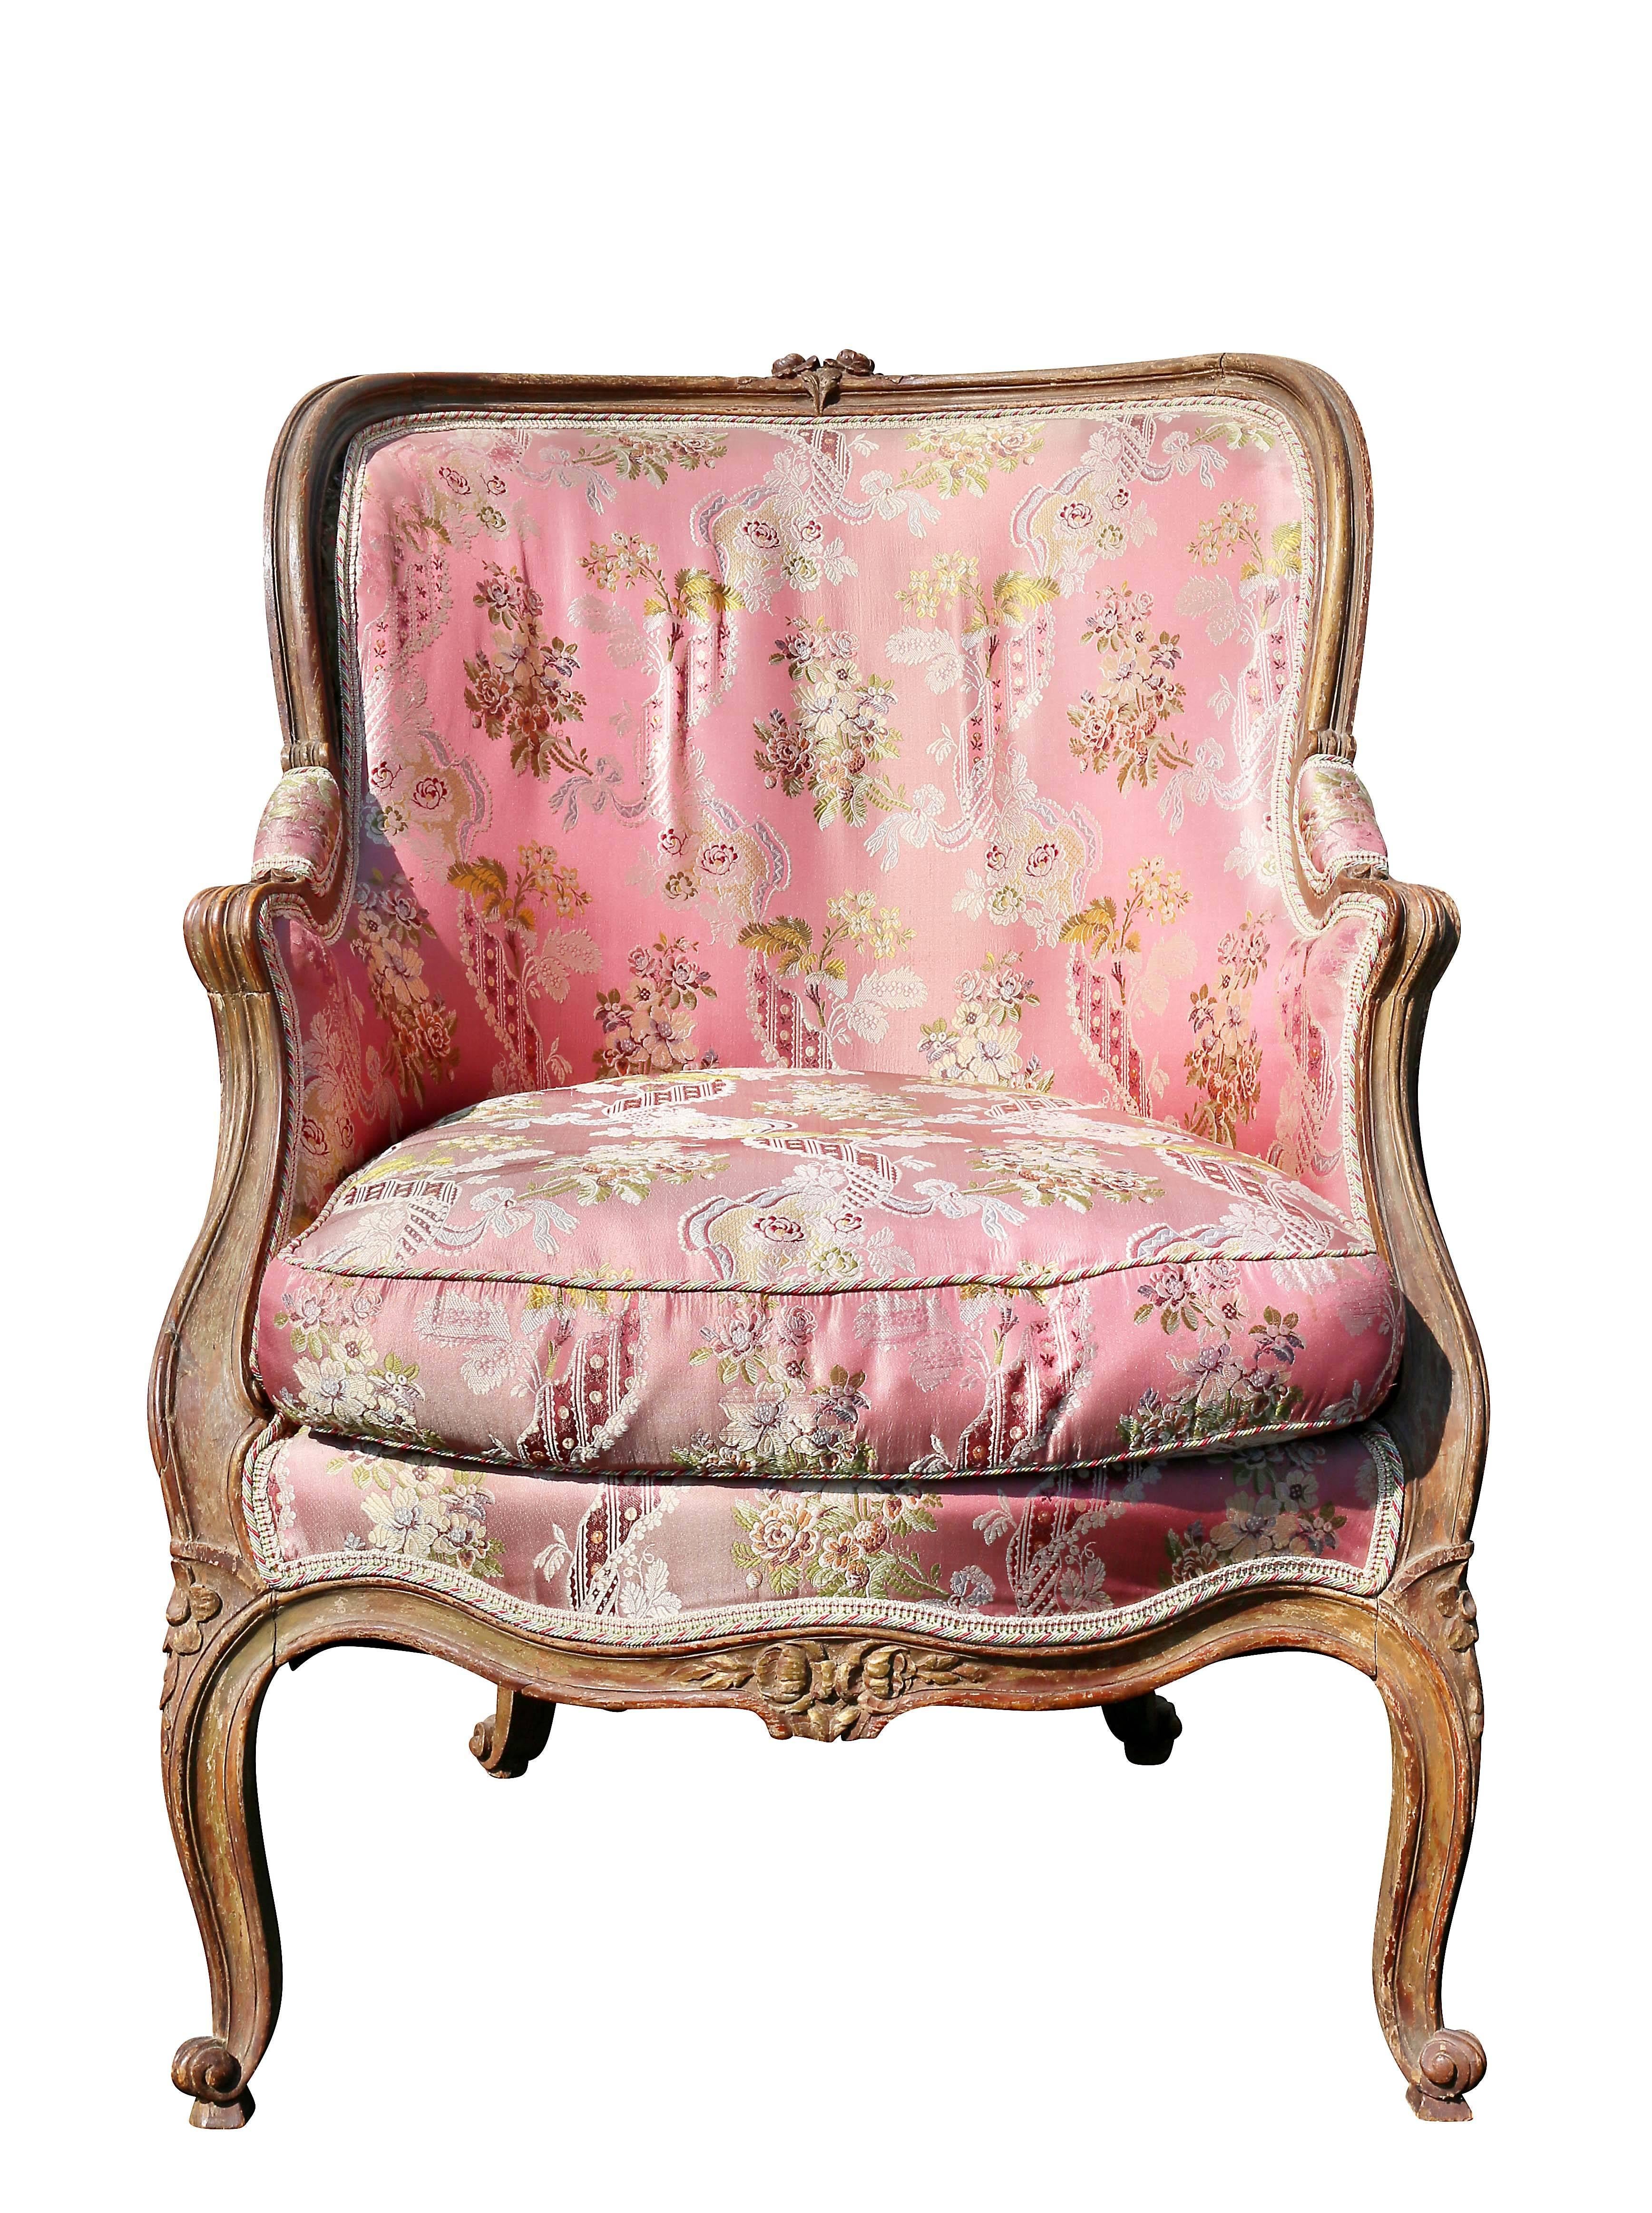 With rounded arched back with central flower heads, upholstered back and seat, carved scrolled arms, raised on cabriole legs.